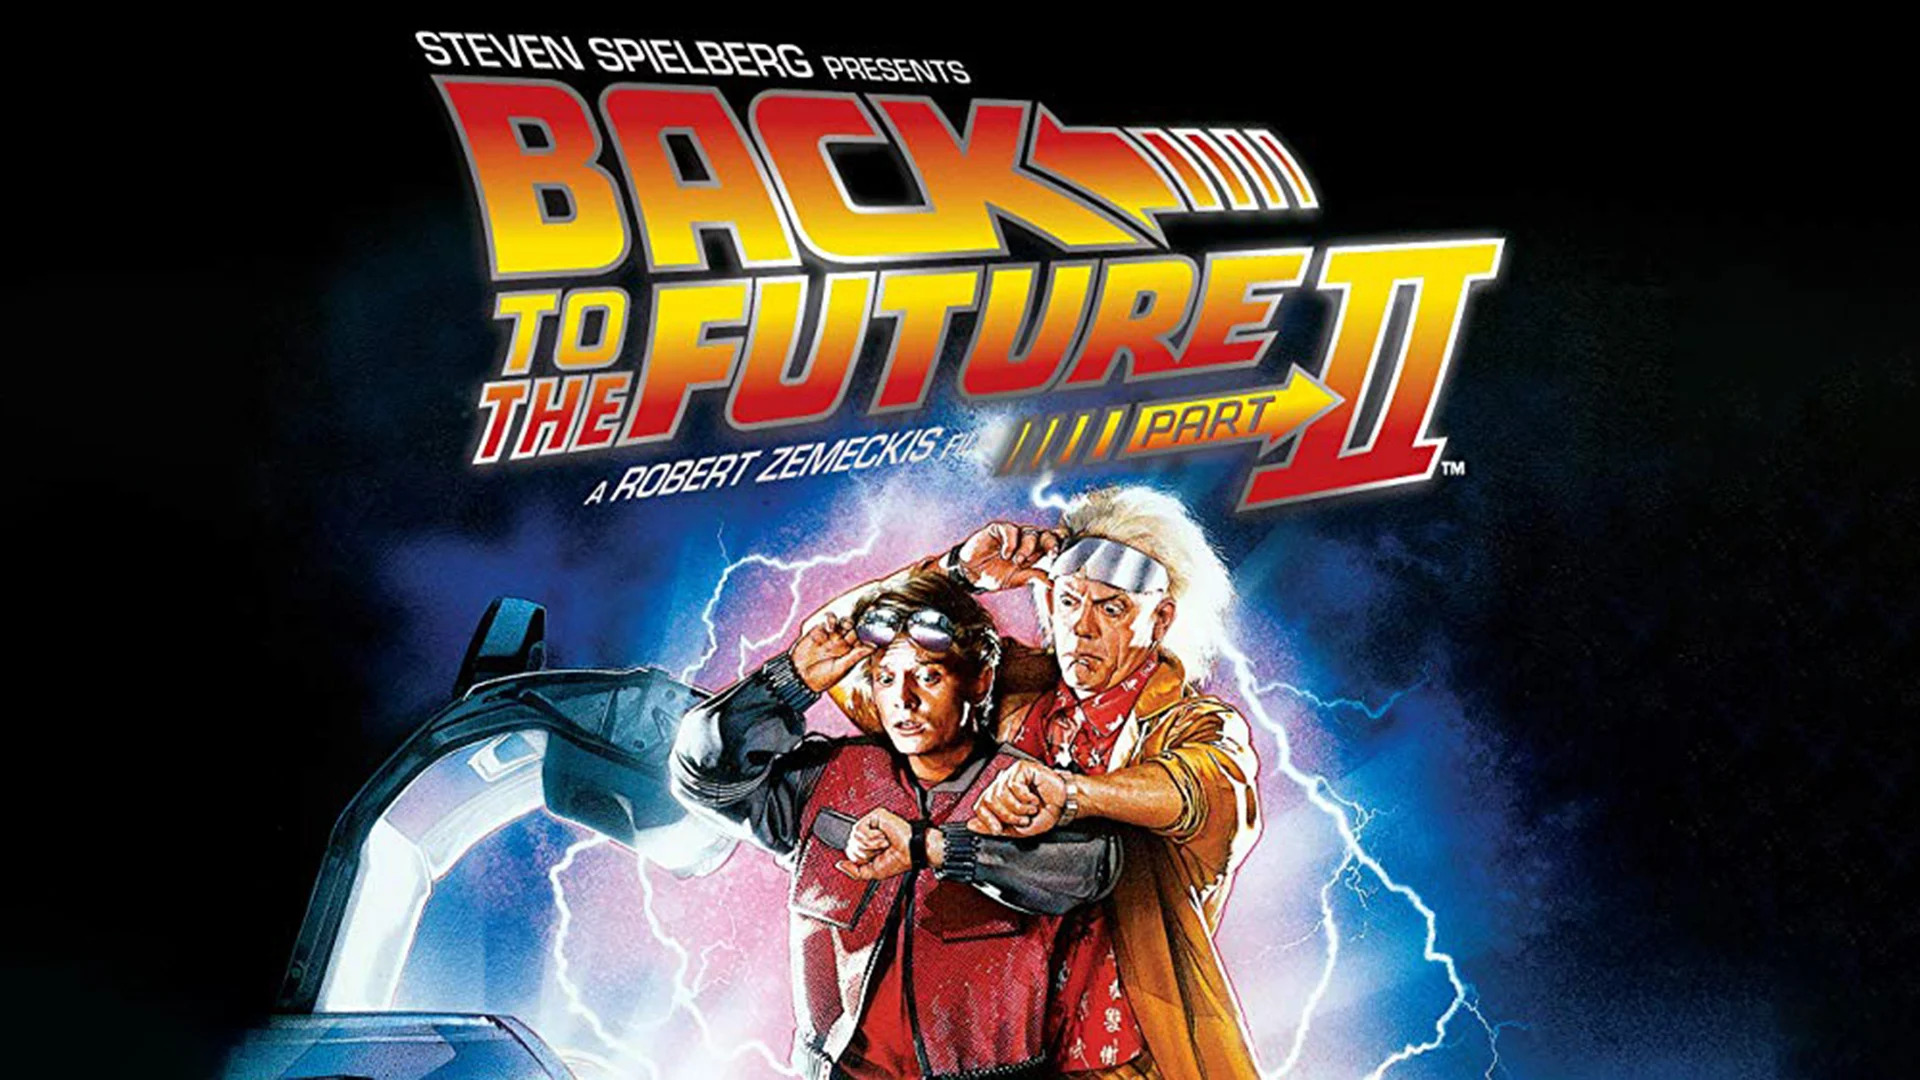 46-facts-about-the-movie-back-to-the-future-part-ii